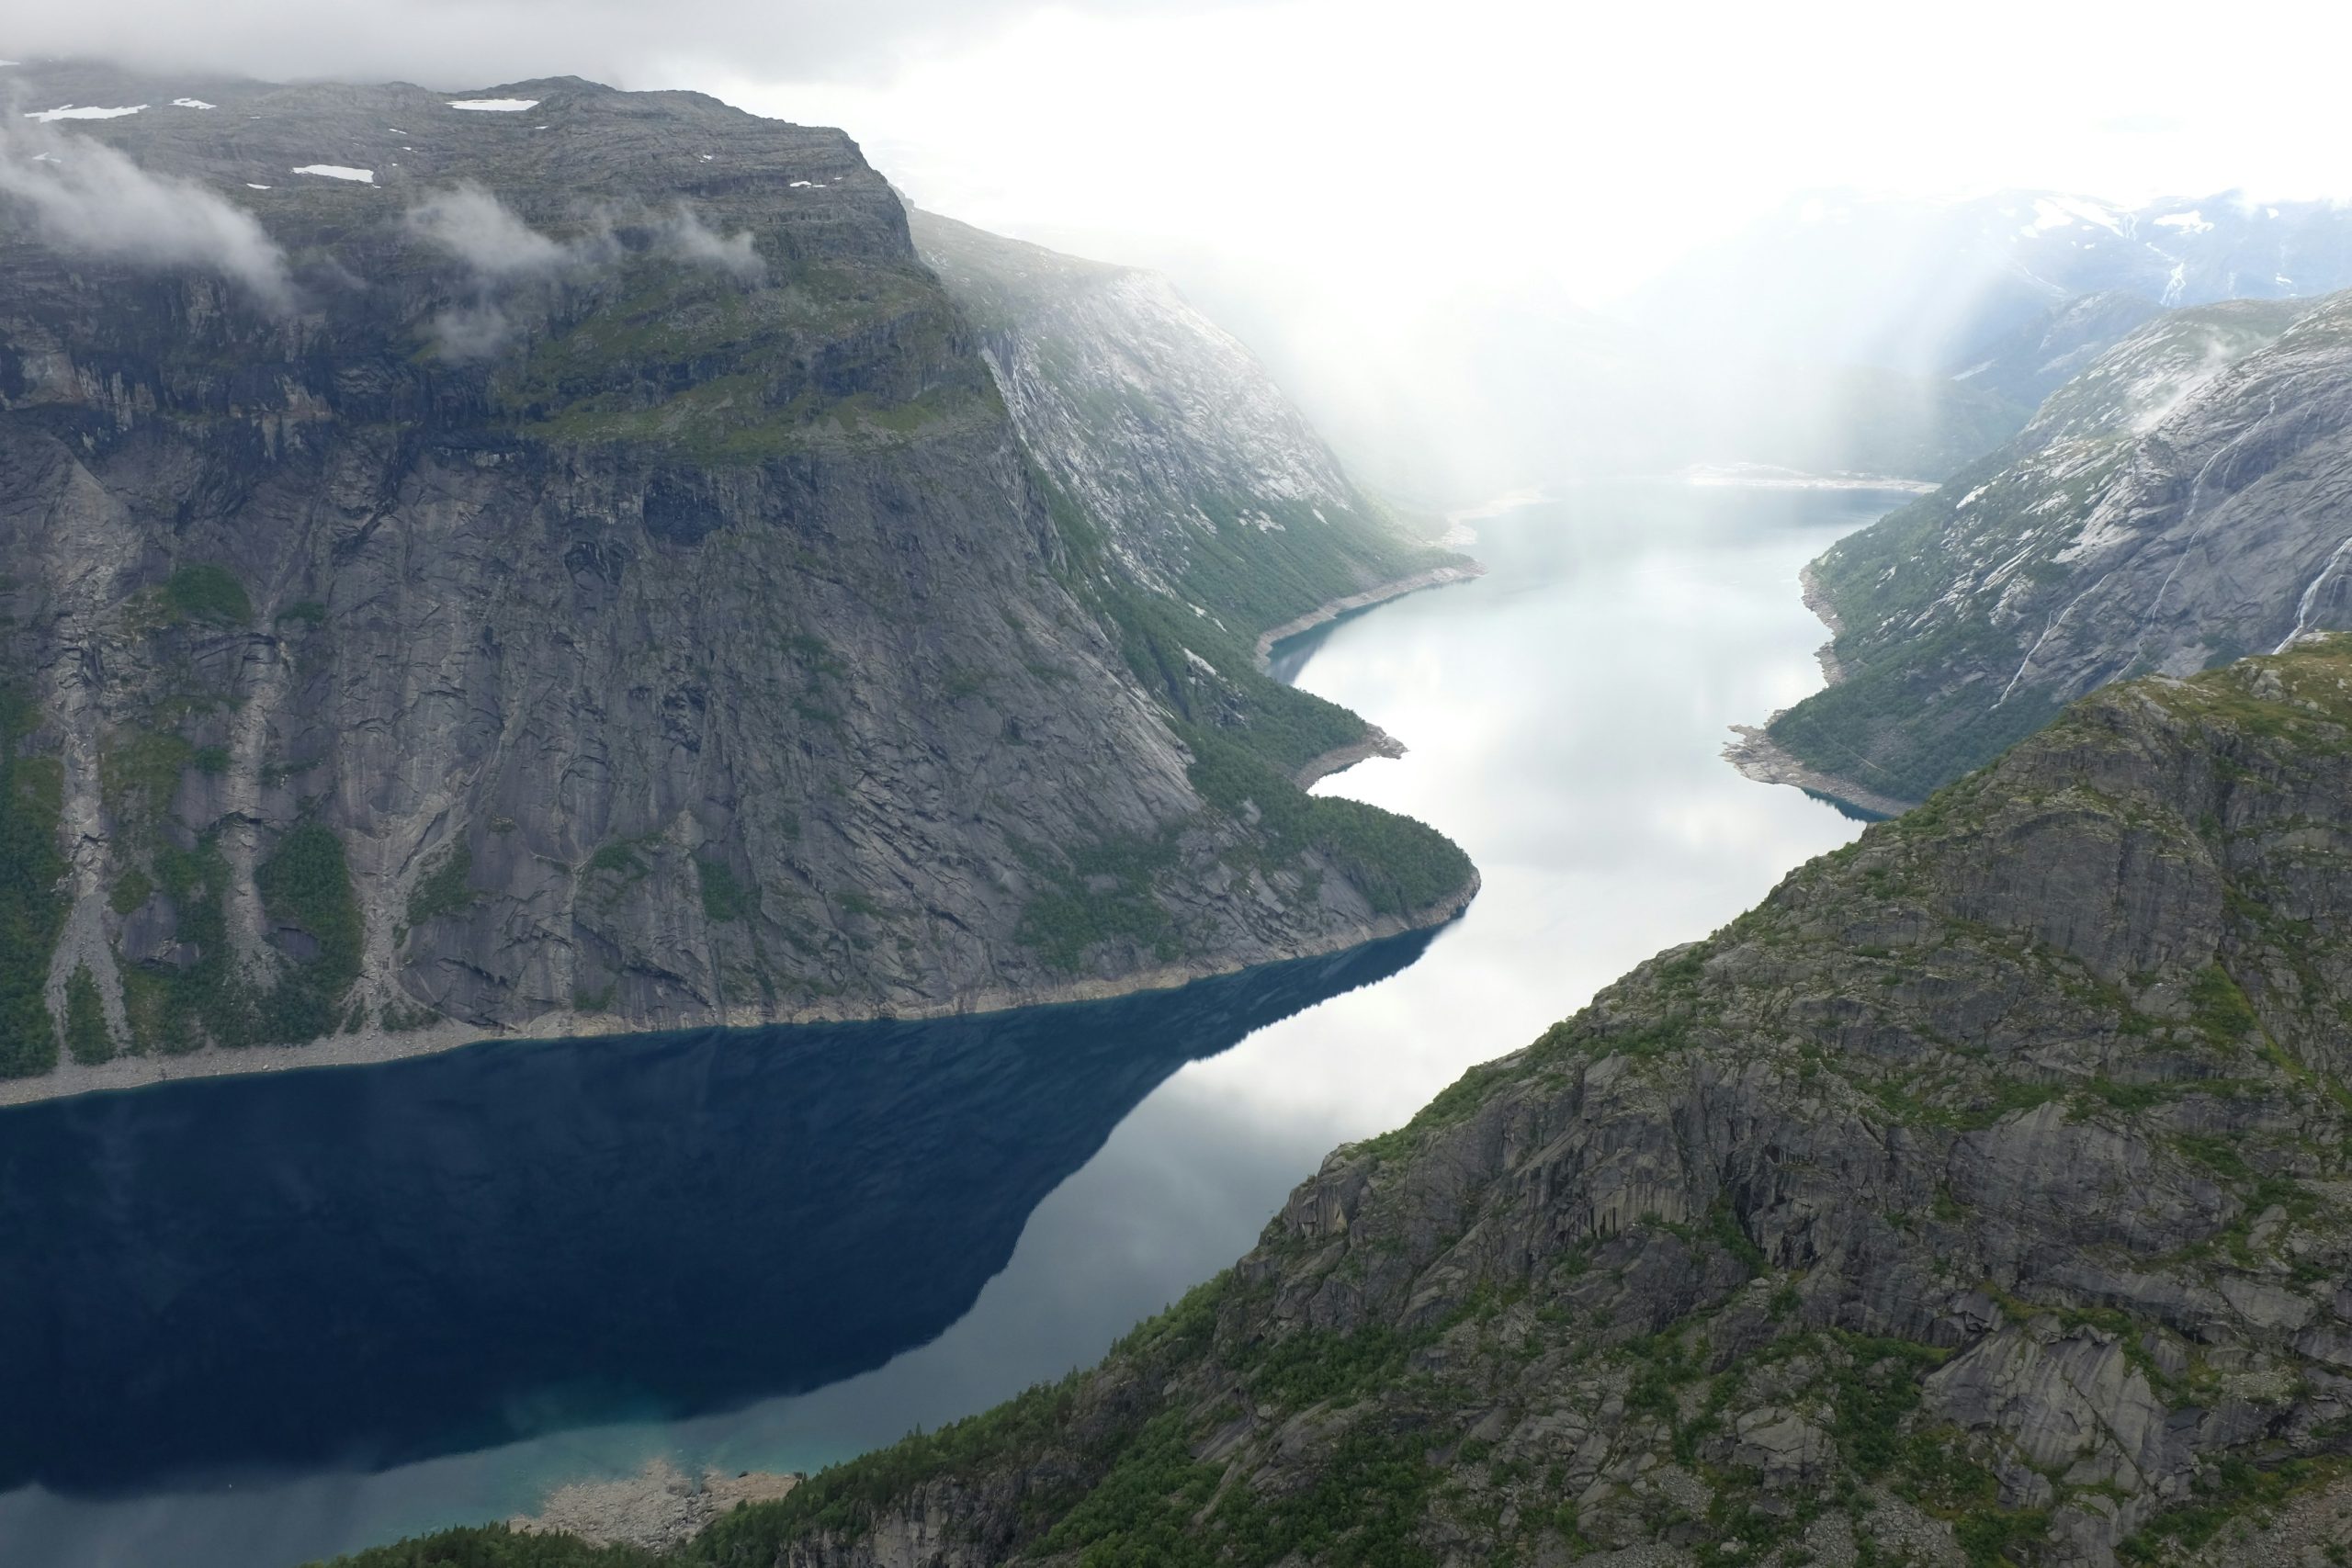 discover the magnificent fjords and breathtaking landscapes with our fjord tours. immerse yourself in the beauty of nature and create unforgettable memories.